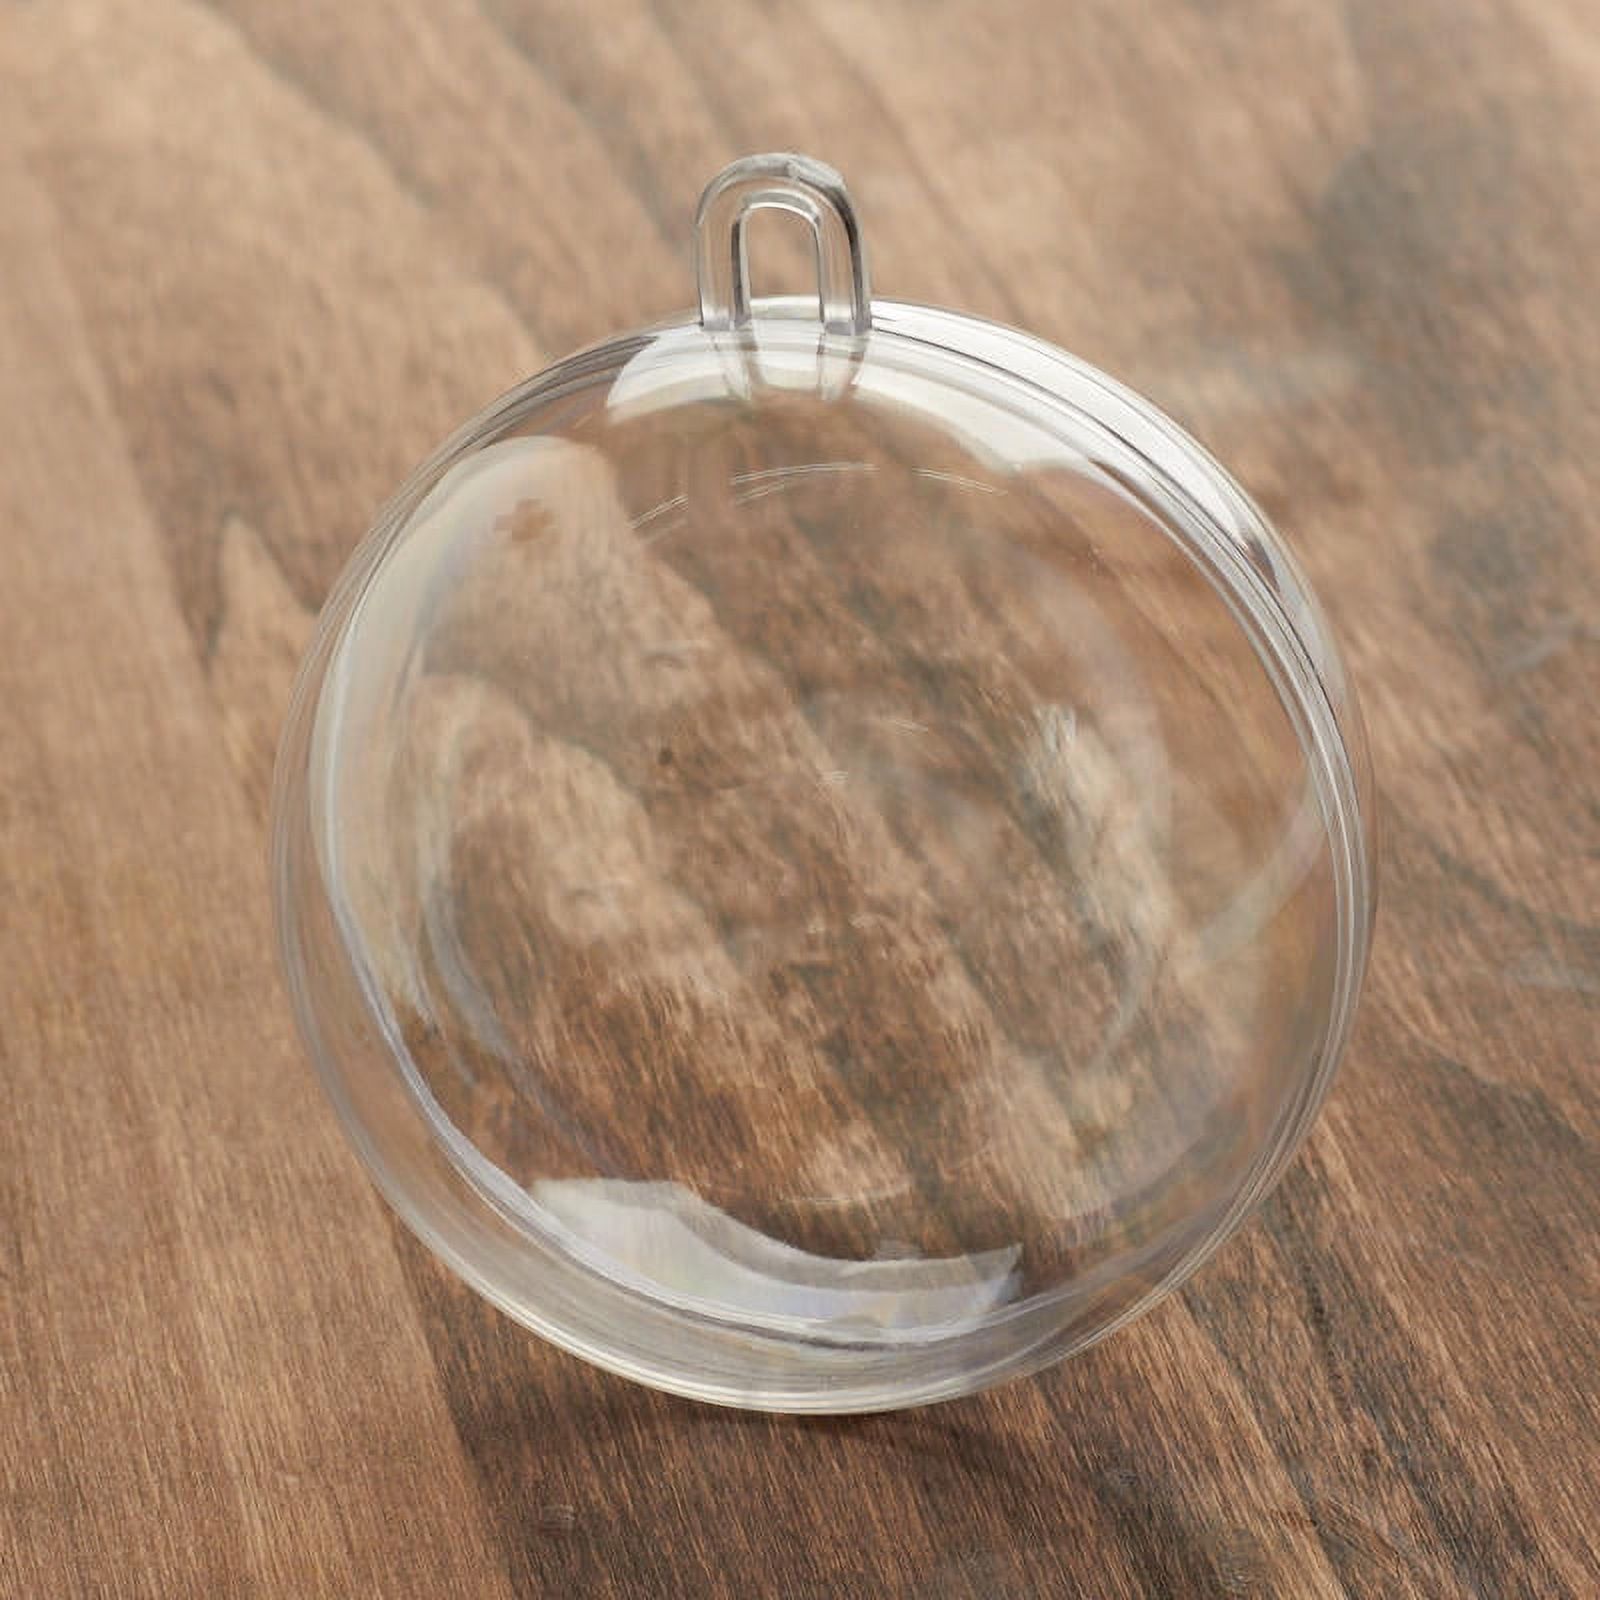 Factory Direct Craft Fillable Clear Plastic Ball Ornaments | 70mm | 6 Pack - image 2 of 3